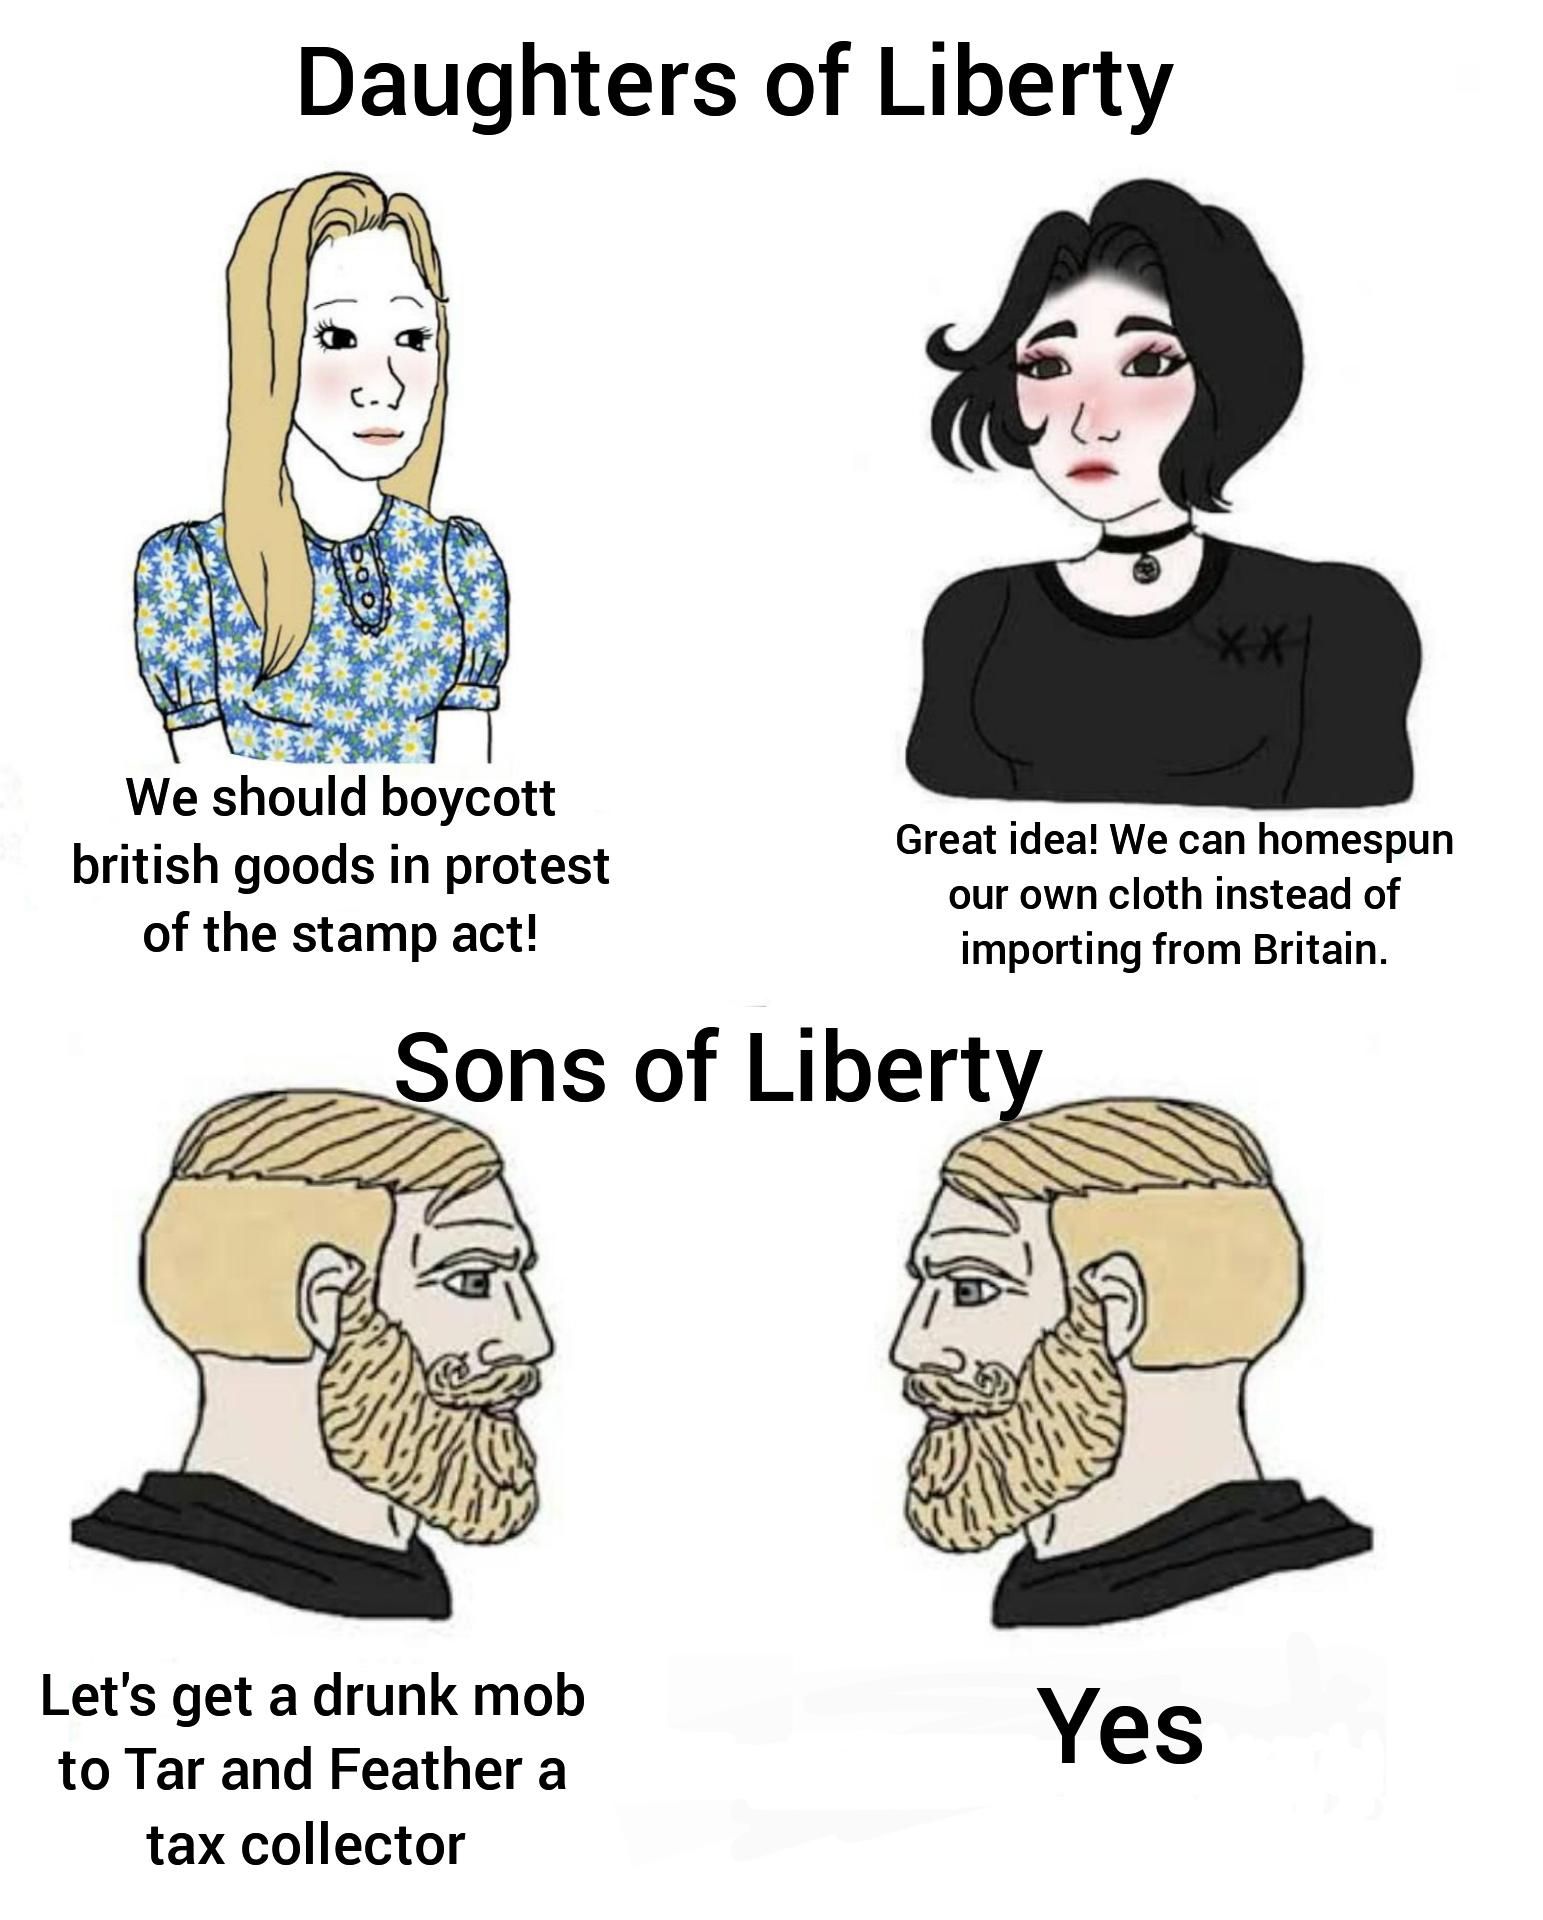 Sons vs Daughters of Liberty were very different